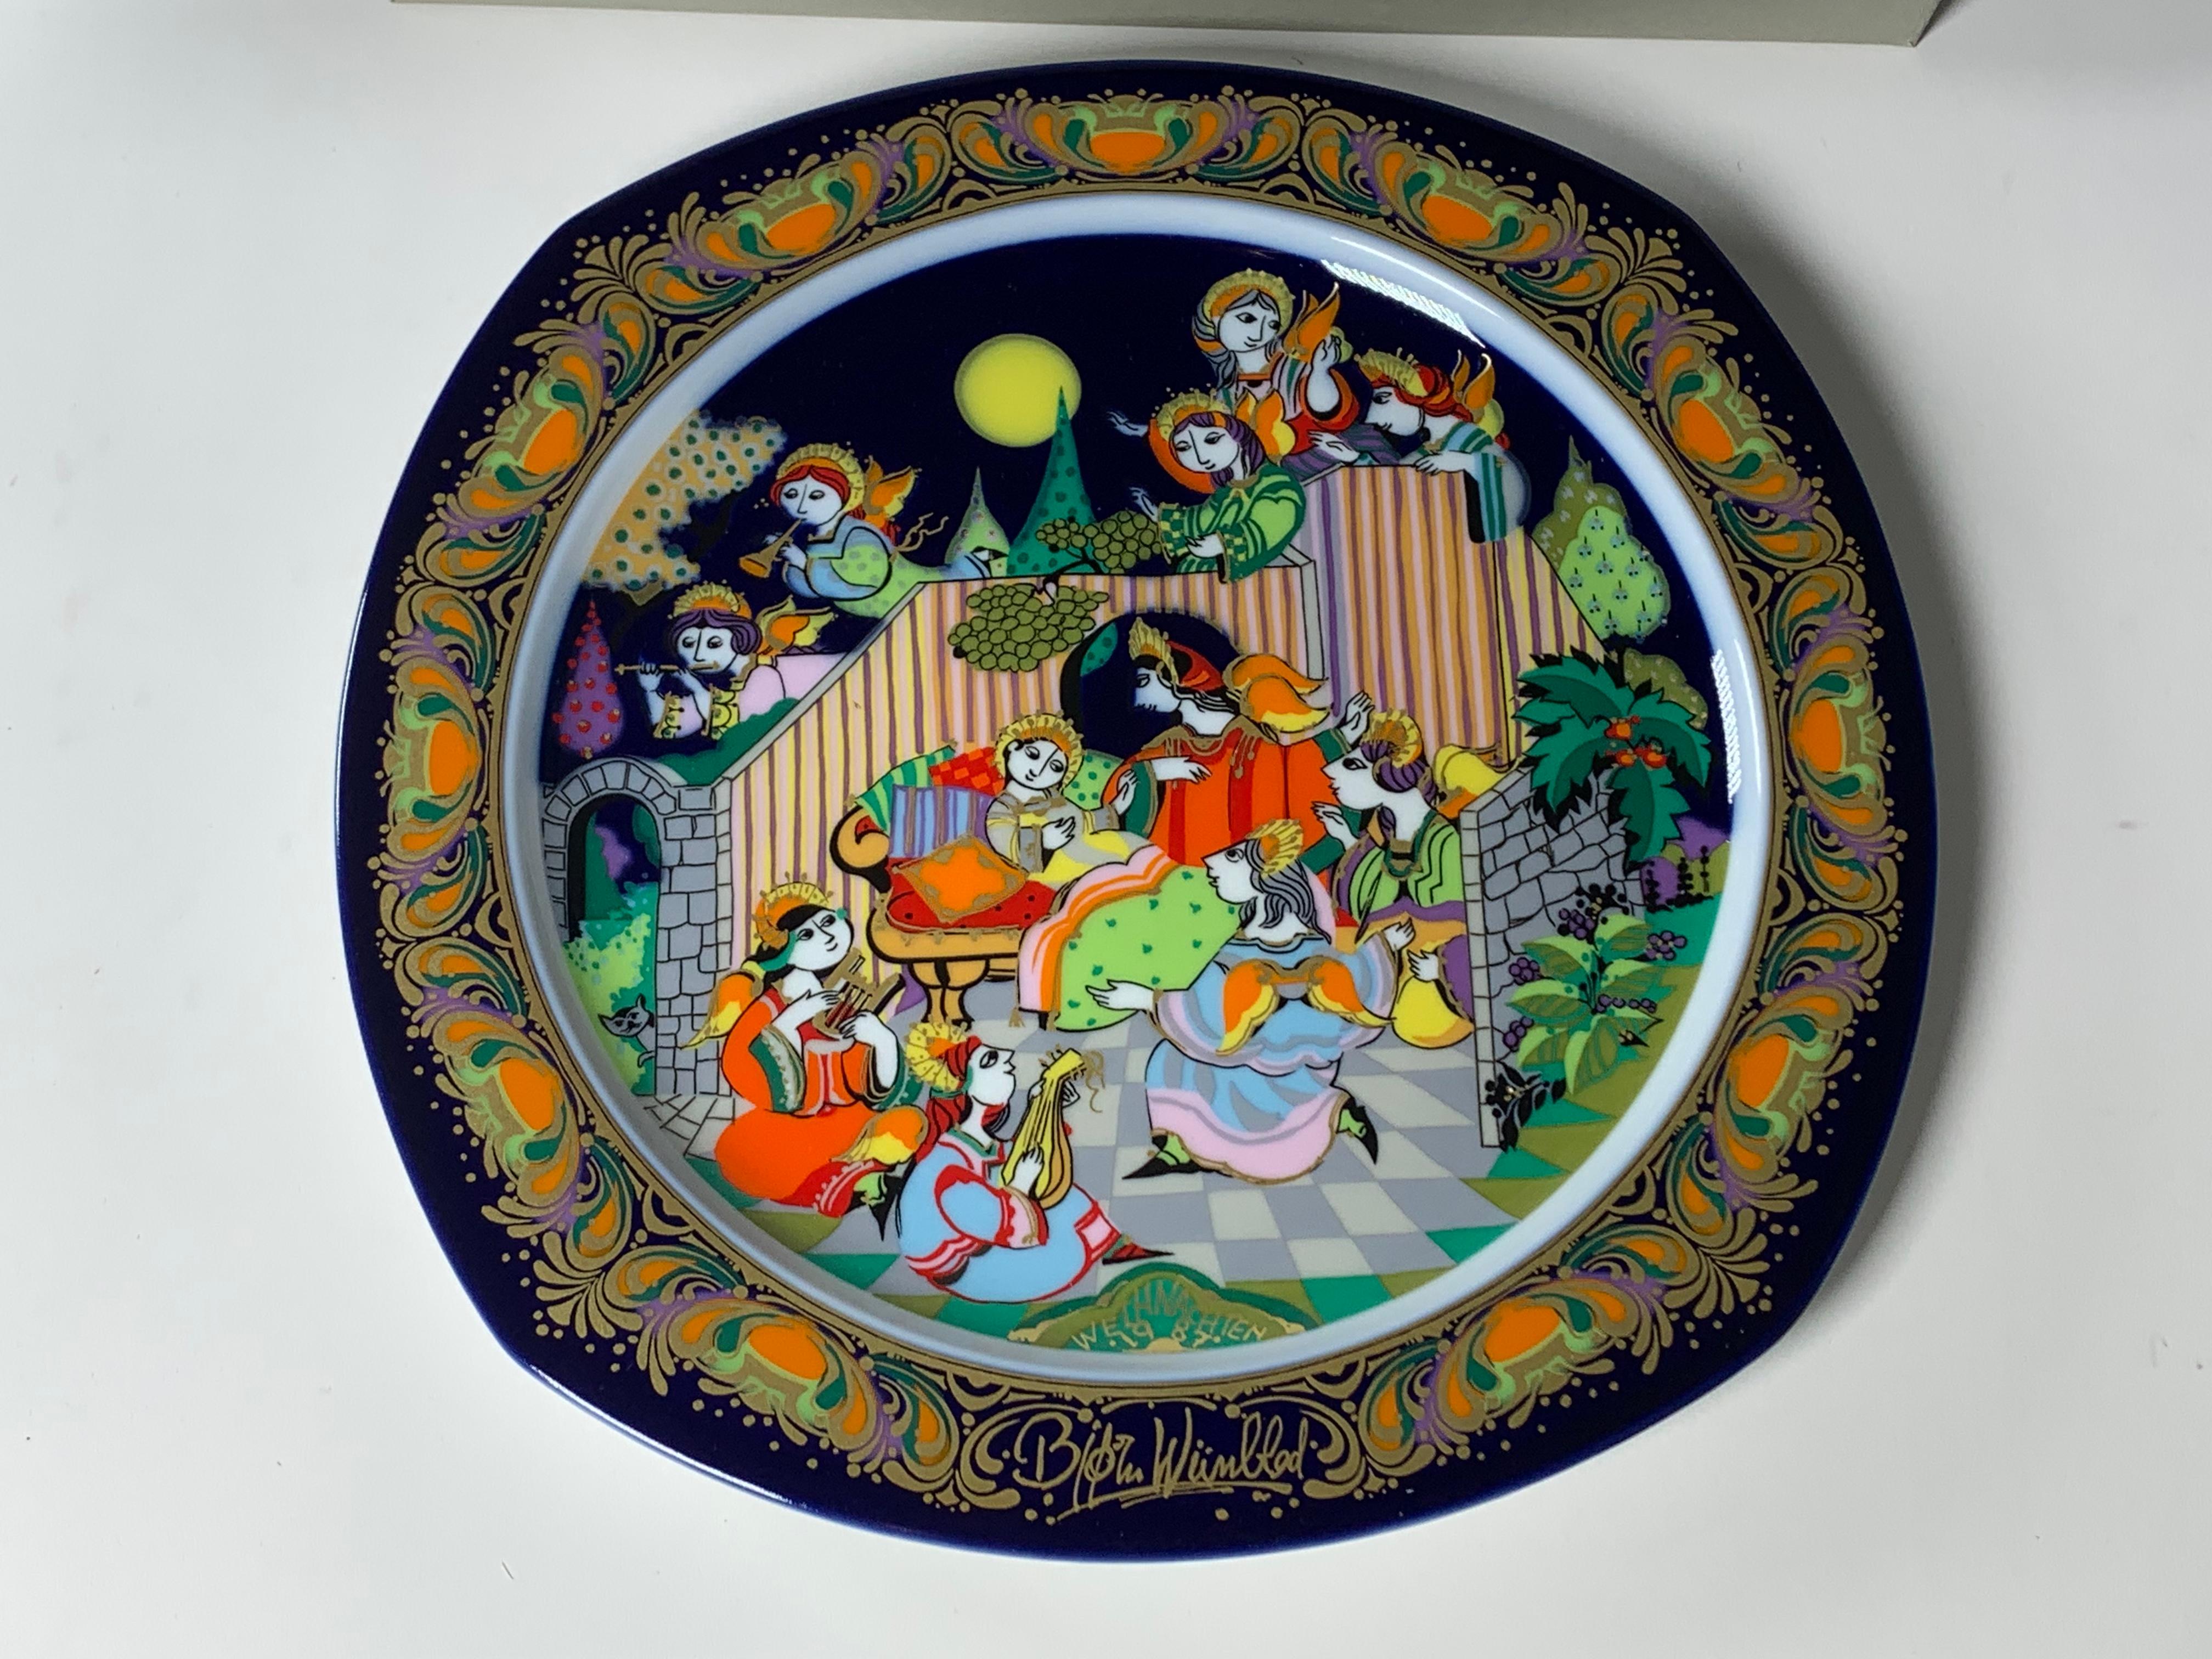 Porcelain Christmas plate from 1987 by Bjorn Wiinblad made by the German manufacturer Rosenthal. The dish is titled “Hark! The Herald Angels Sing” and is reason no. 5 of the series. When Rosenthal asked the Danish artist to illustrate a new series